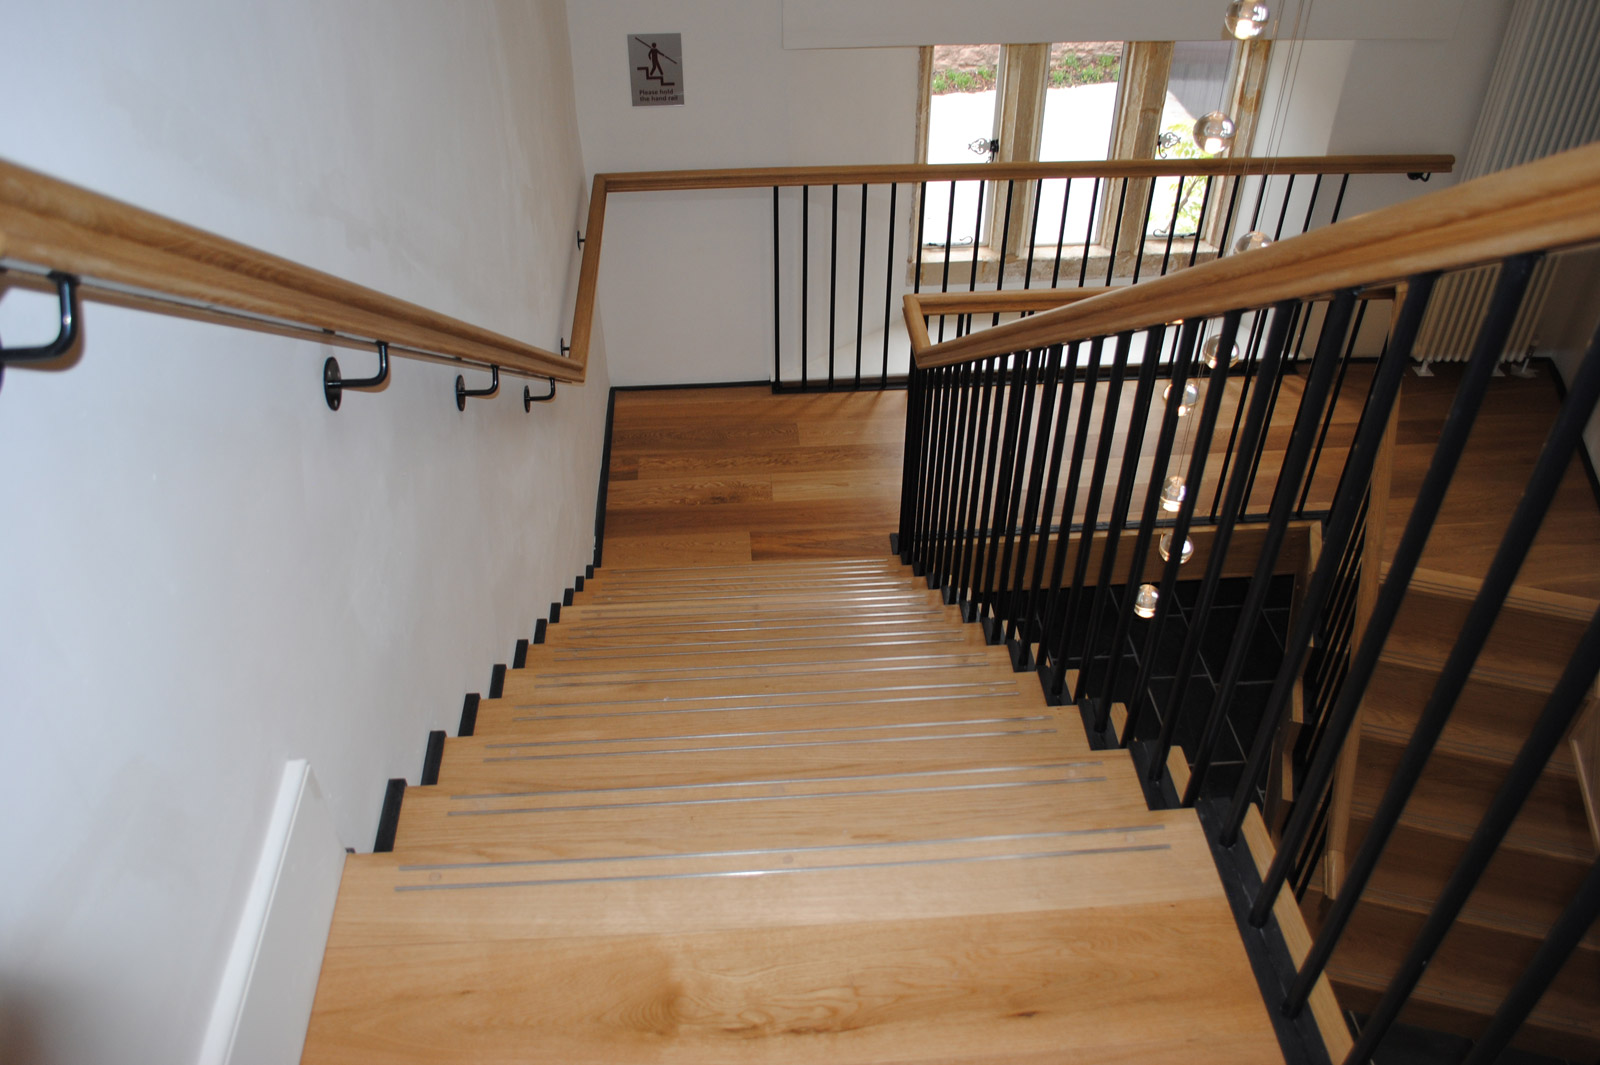 Bespoke timber staircases